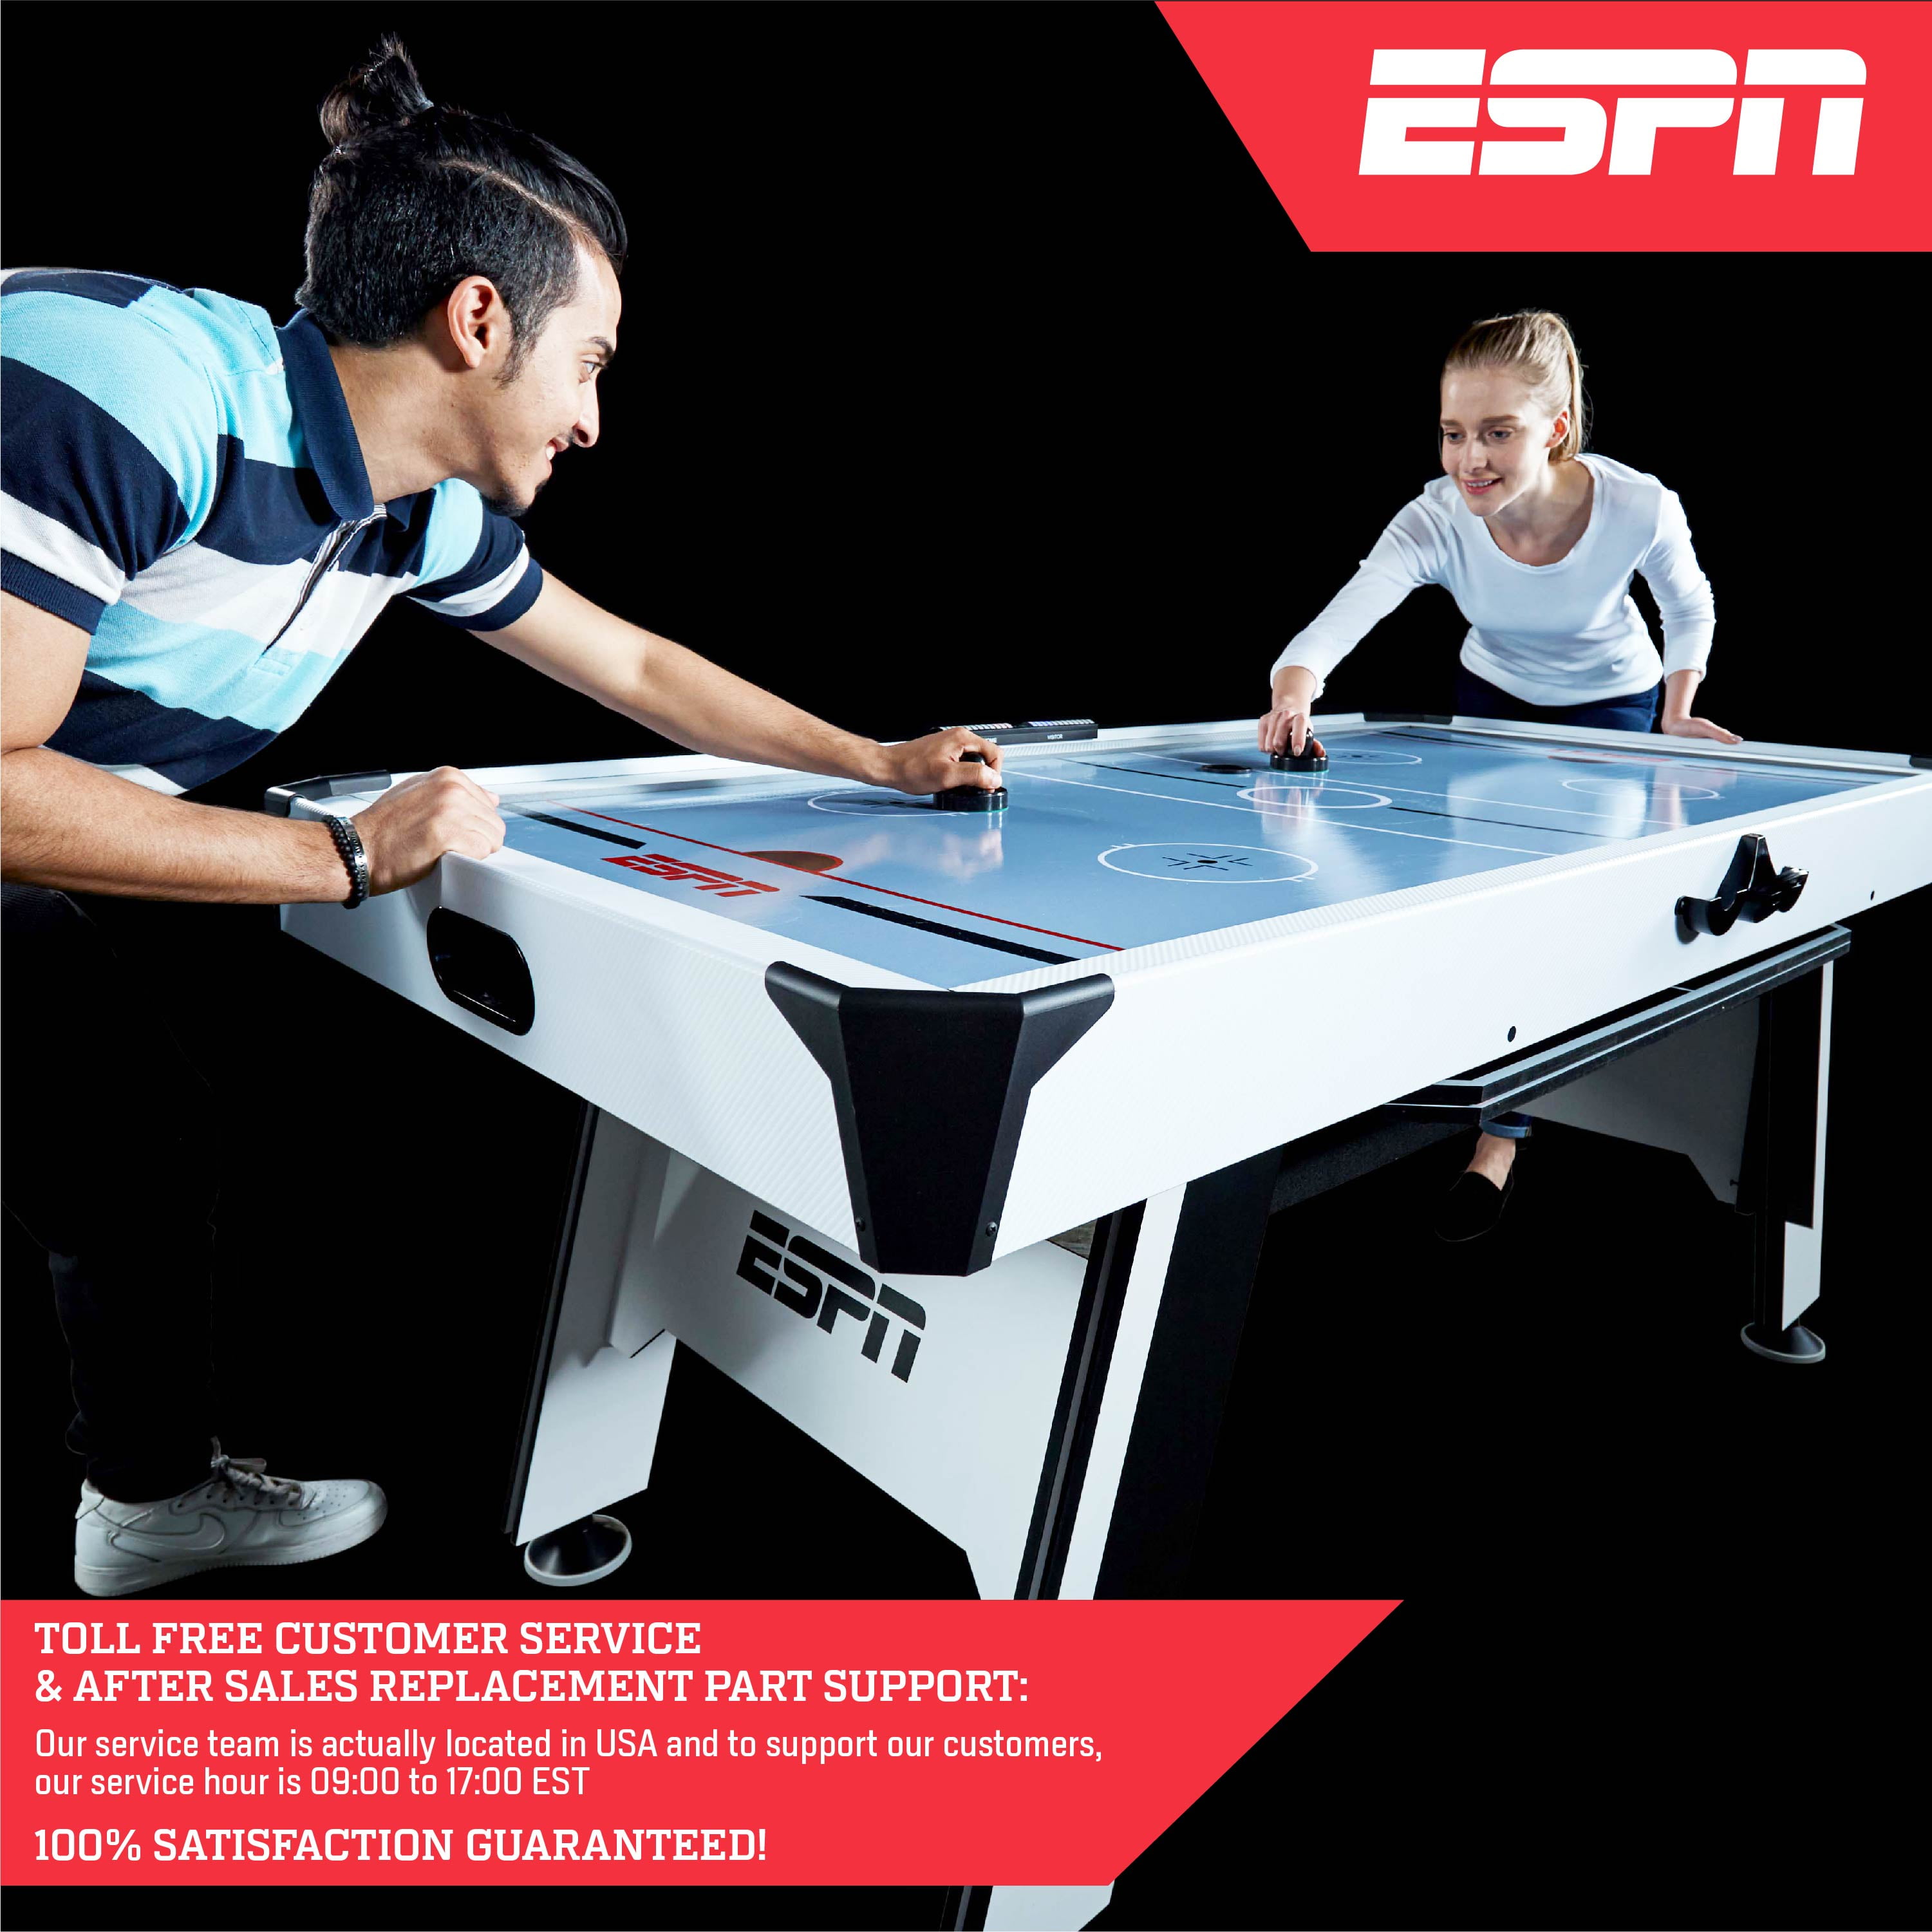 BS 3 in 1 Combo Multi Game Table Entertainment Game Foosball Soccer Convert Billiards Pool Air Hockey Multifunction Family Sport Kids and Adults Interactive Furniture & eBook by BADA Shop 